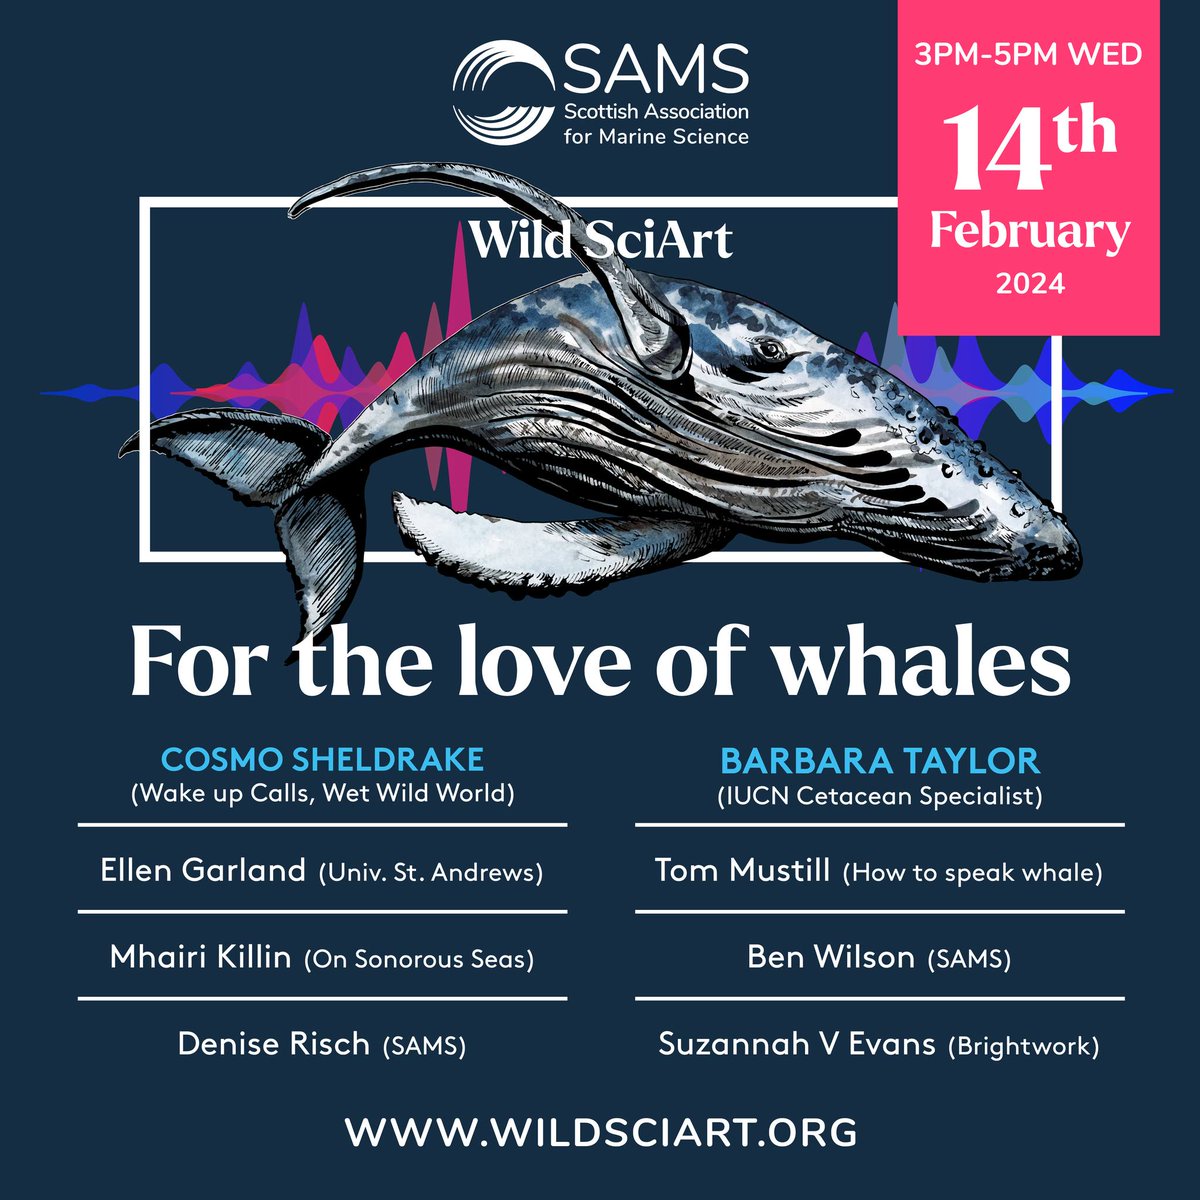 Our Wild #SciArt event returns on Valentine's Day, 2024. 'For the Love of Whales' bring scientists and artists together to explore how collaborations can enhance the research and conservation of marine mammals. Register for free here👉 wildsciart.org #WhaleTalk